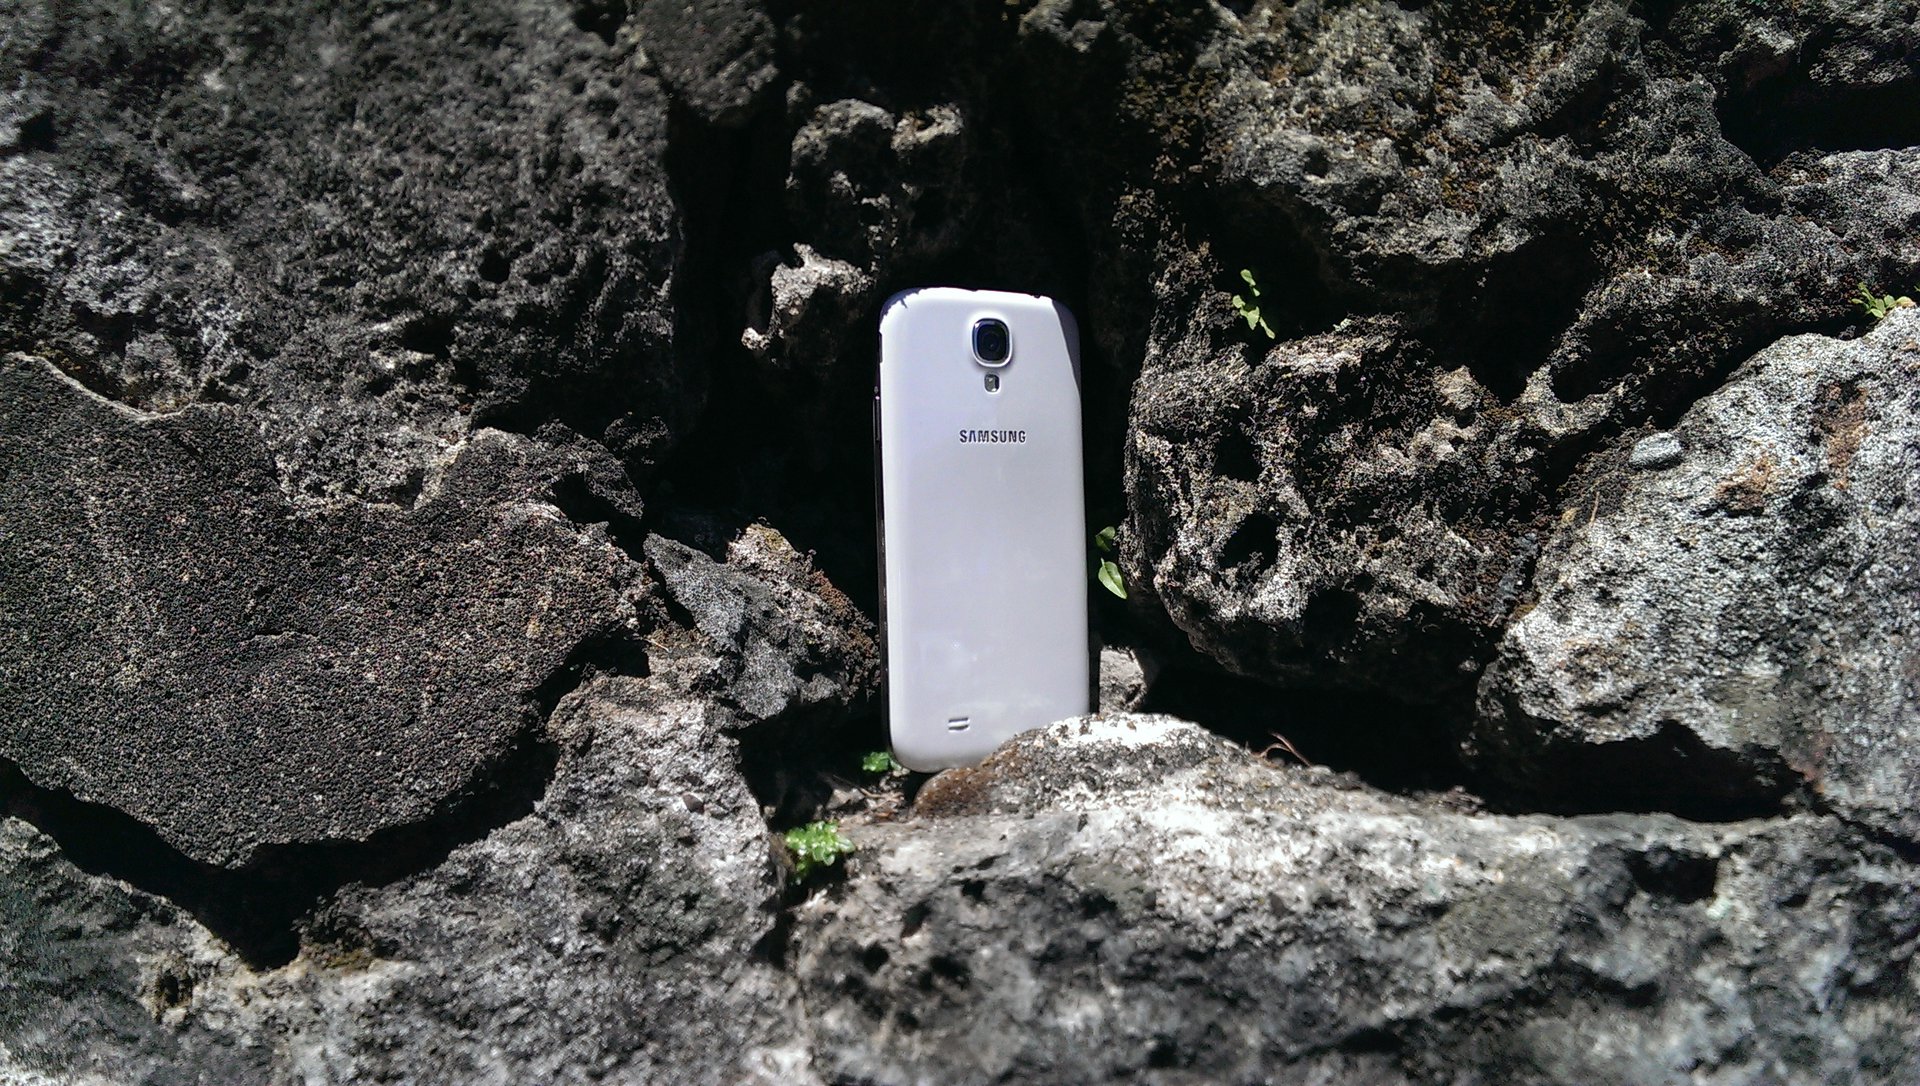 The HTC One photographs the Galaxy S4.